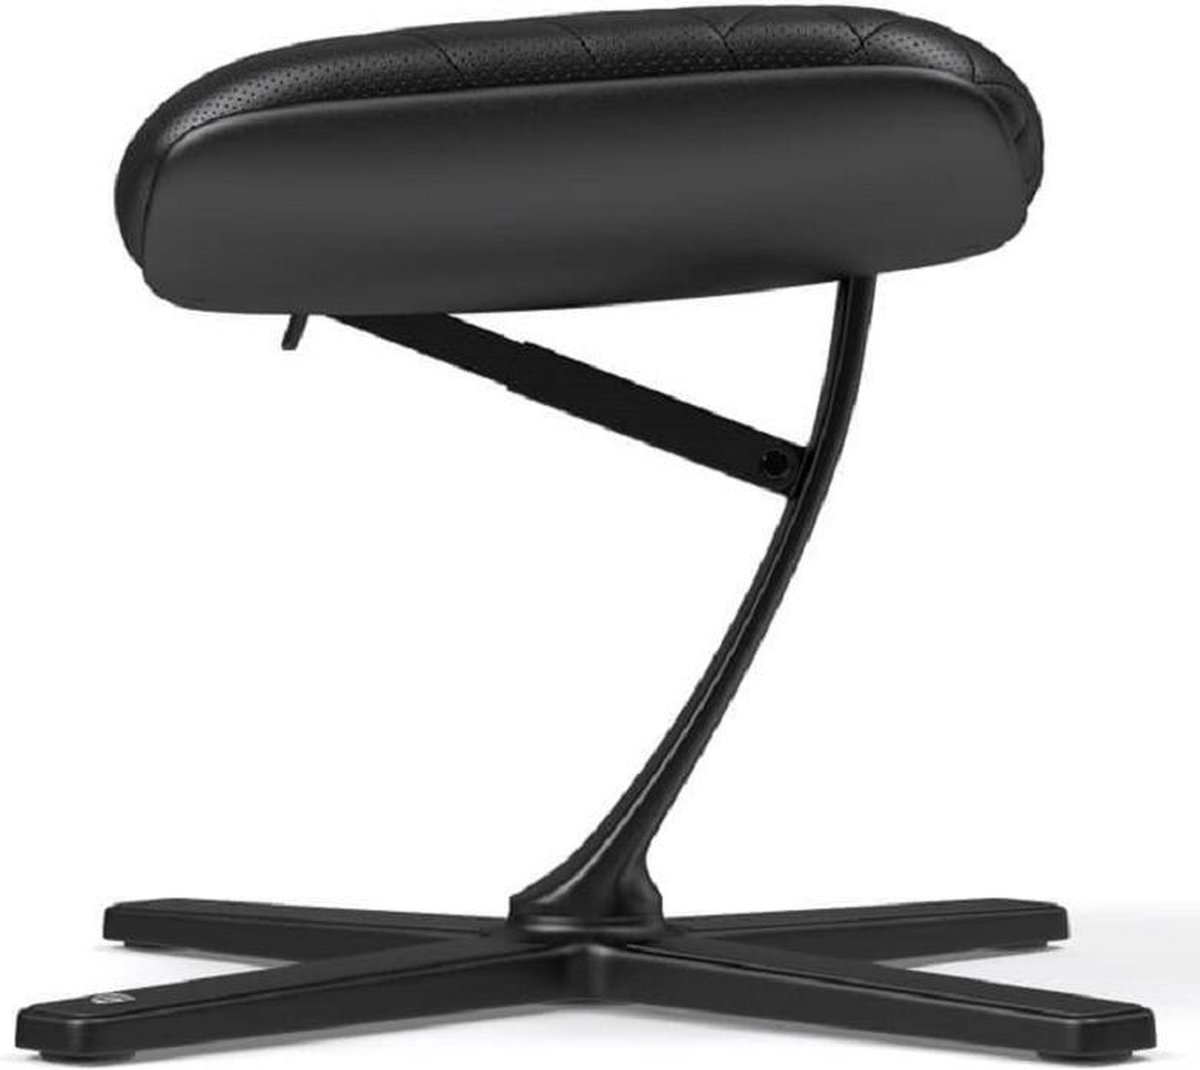 Noblechairs Footrest - Black (Real leather)